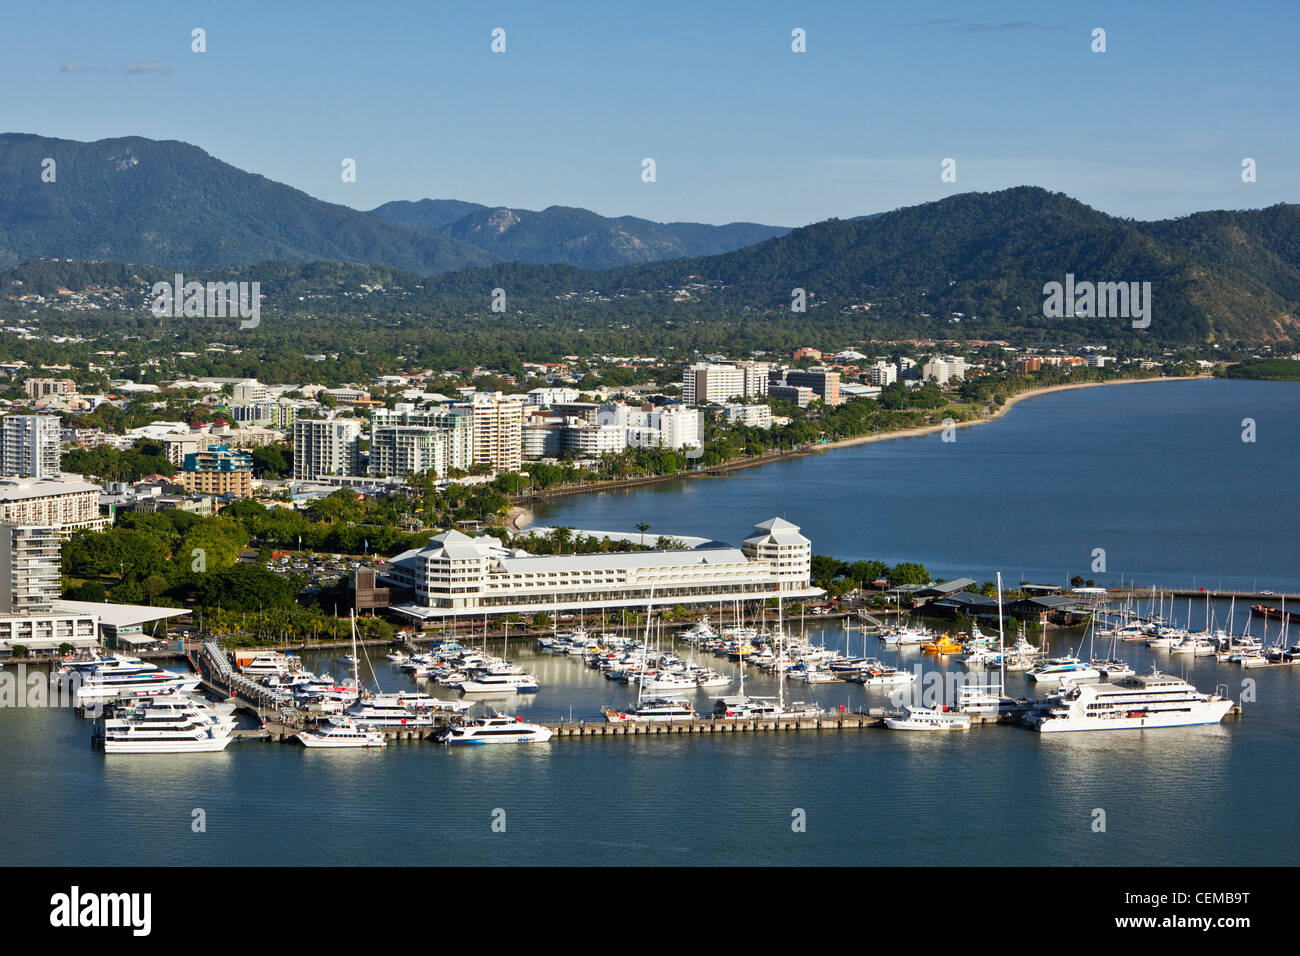 Aerial view of Marlin Marina and city centre. Cairns, Queensland, Australia Stock Photo